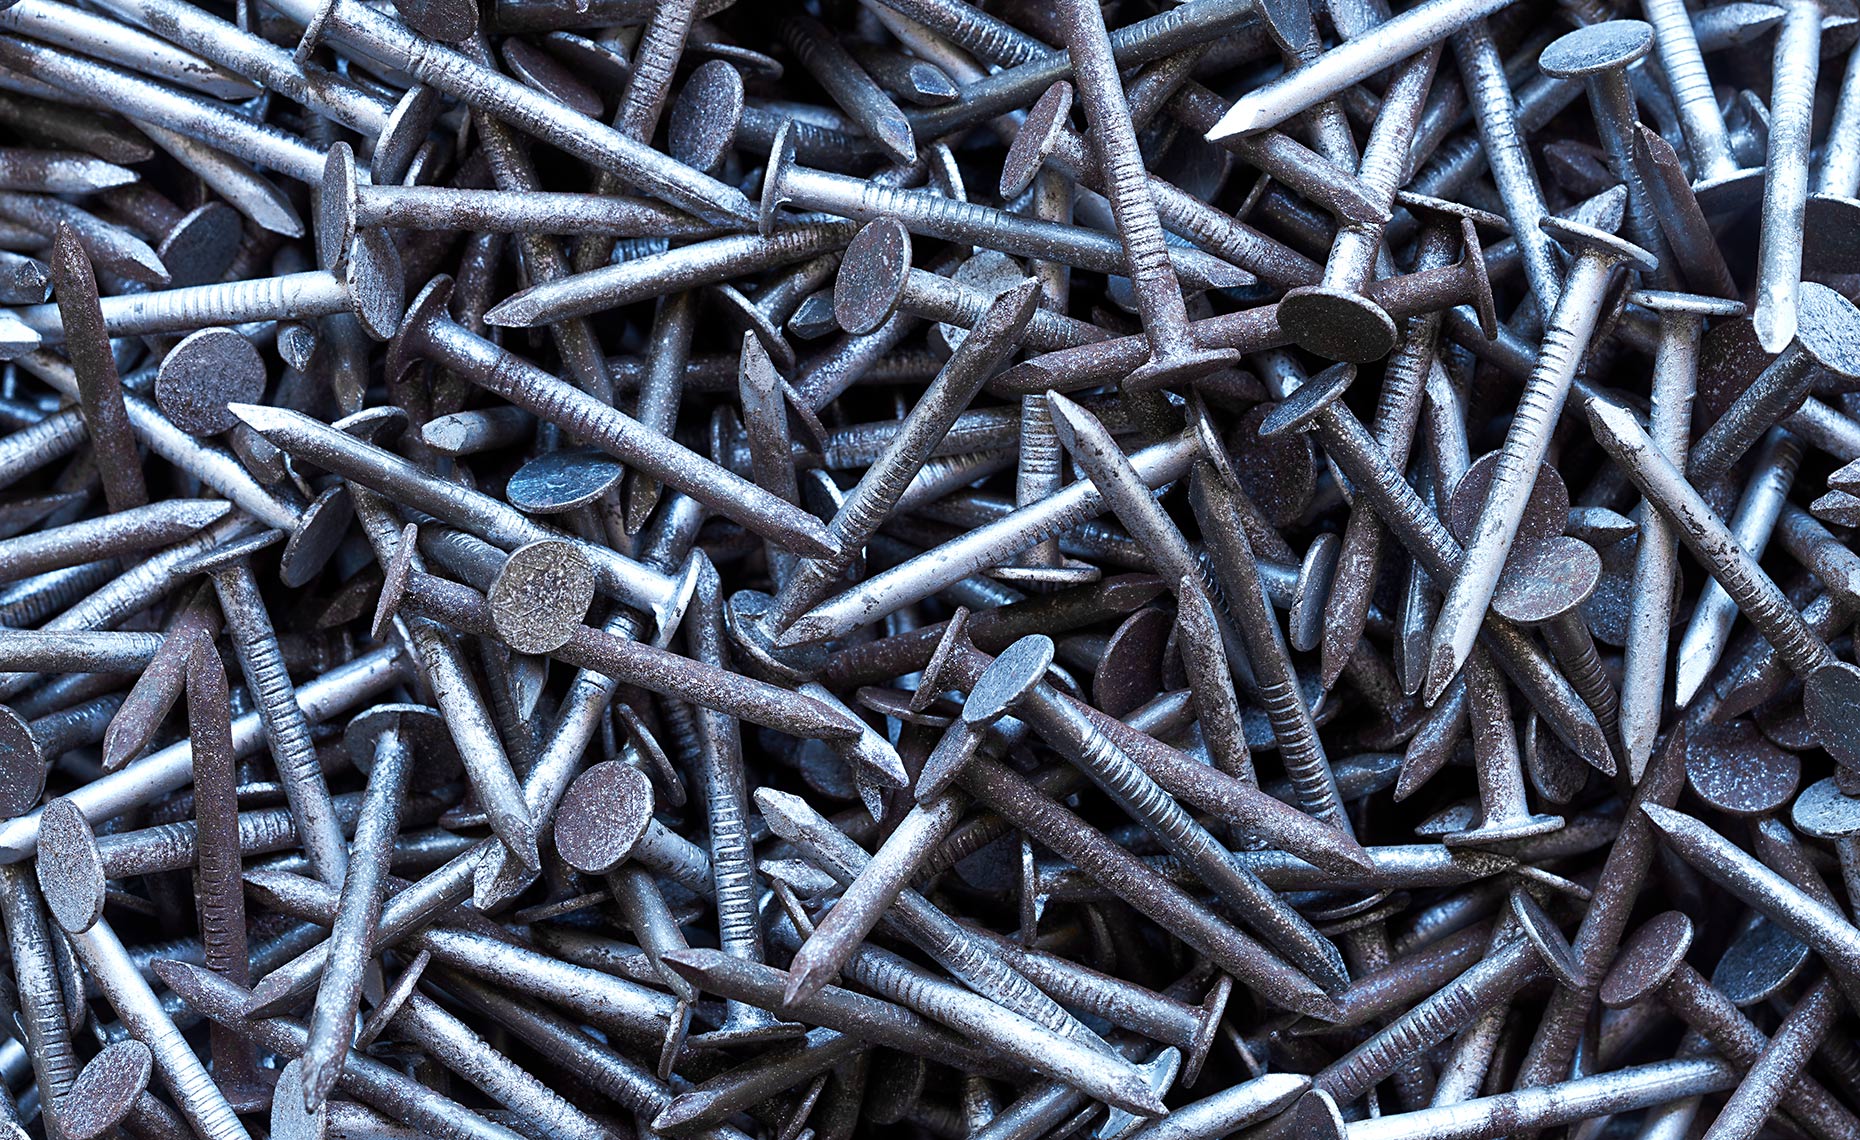 Pile Of Nails, Greg Shapps, Shapps Photography, LLC.